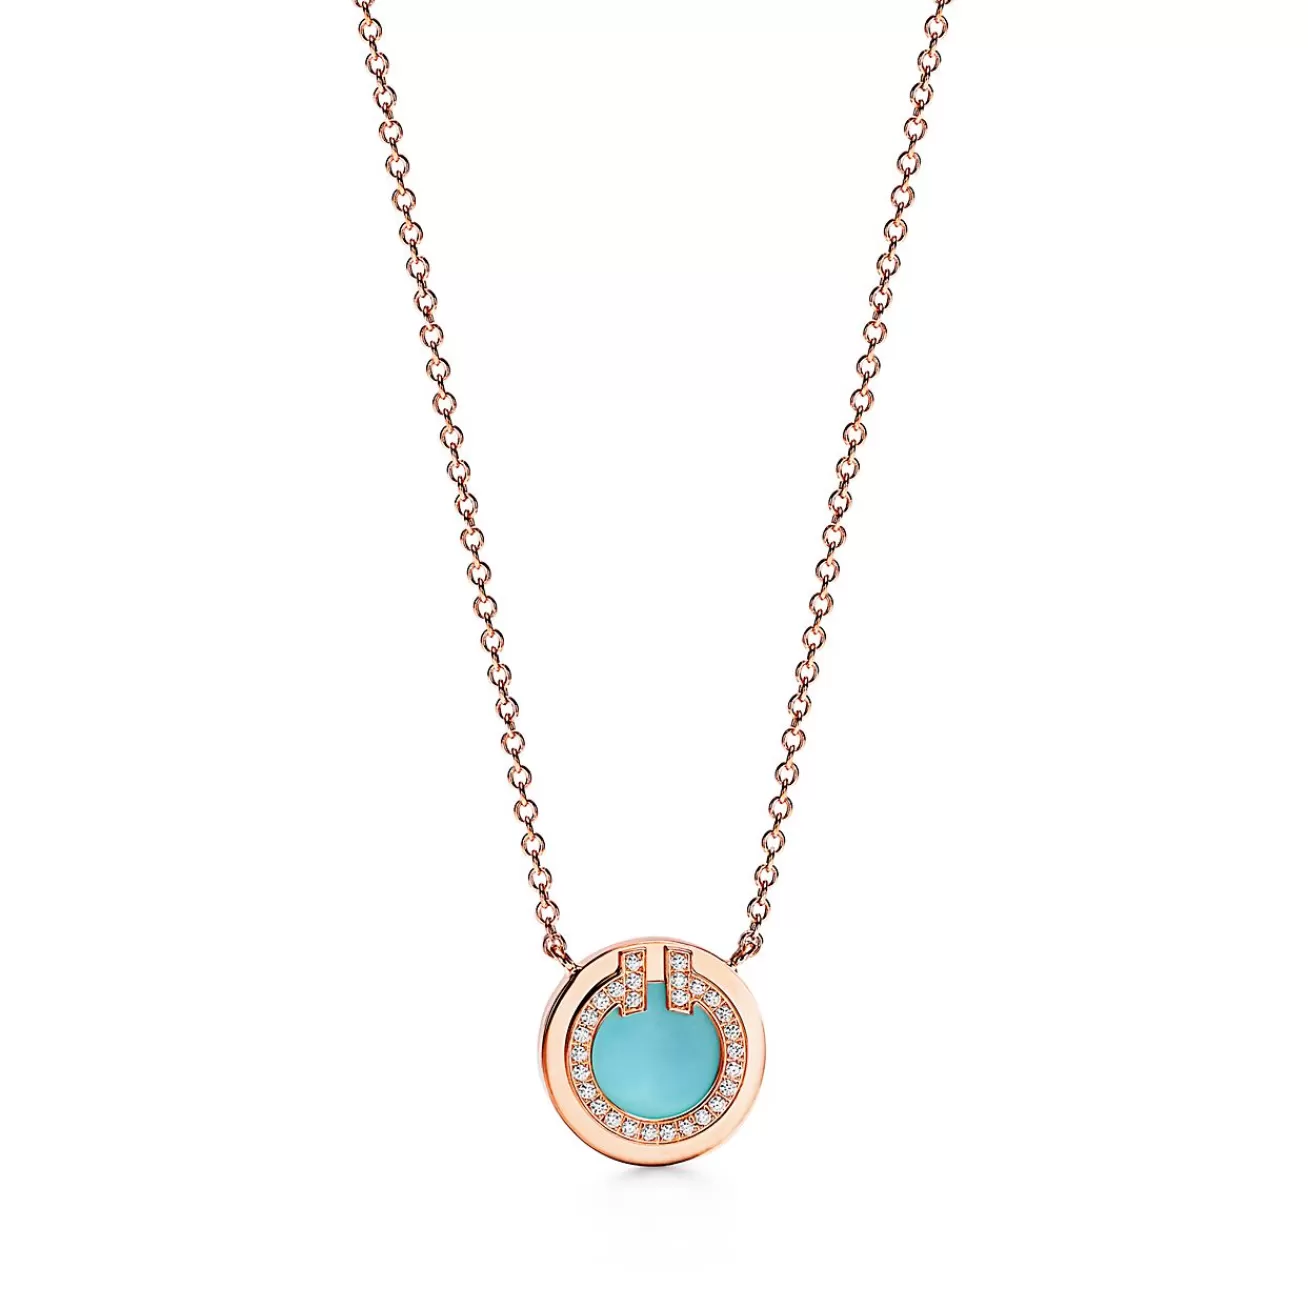 Tiffany & Co. Tiffany T diamond and turquoise circle pendant in 18k rose gold, small. | ^ Necklaces & Pendants | Rose Gold Jewelry